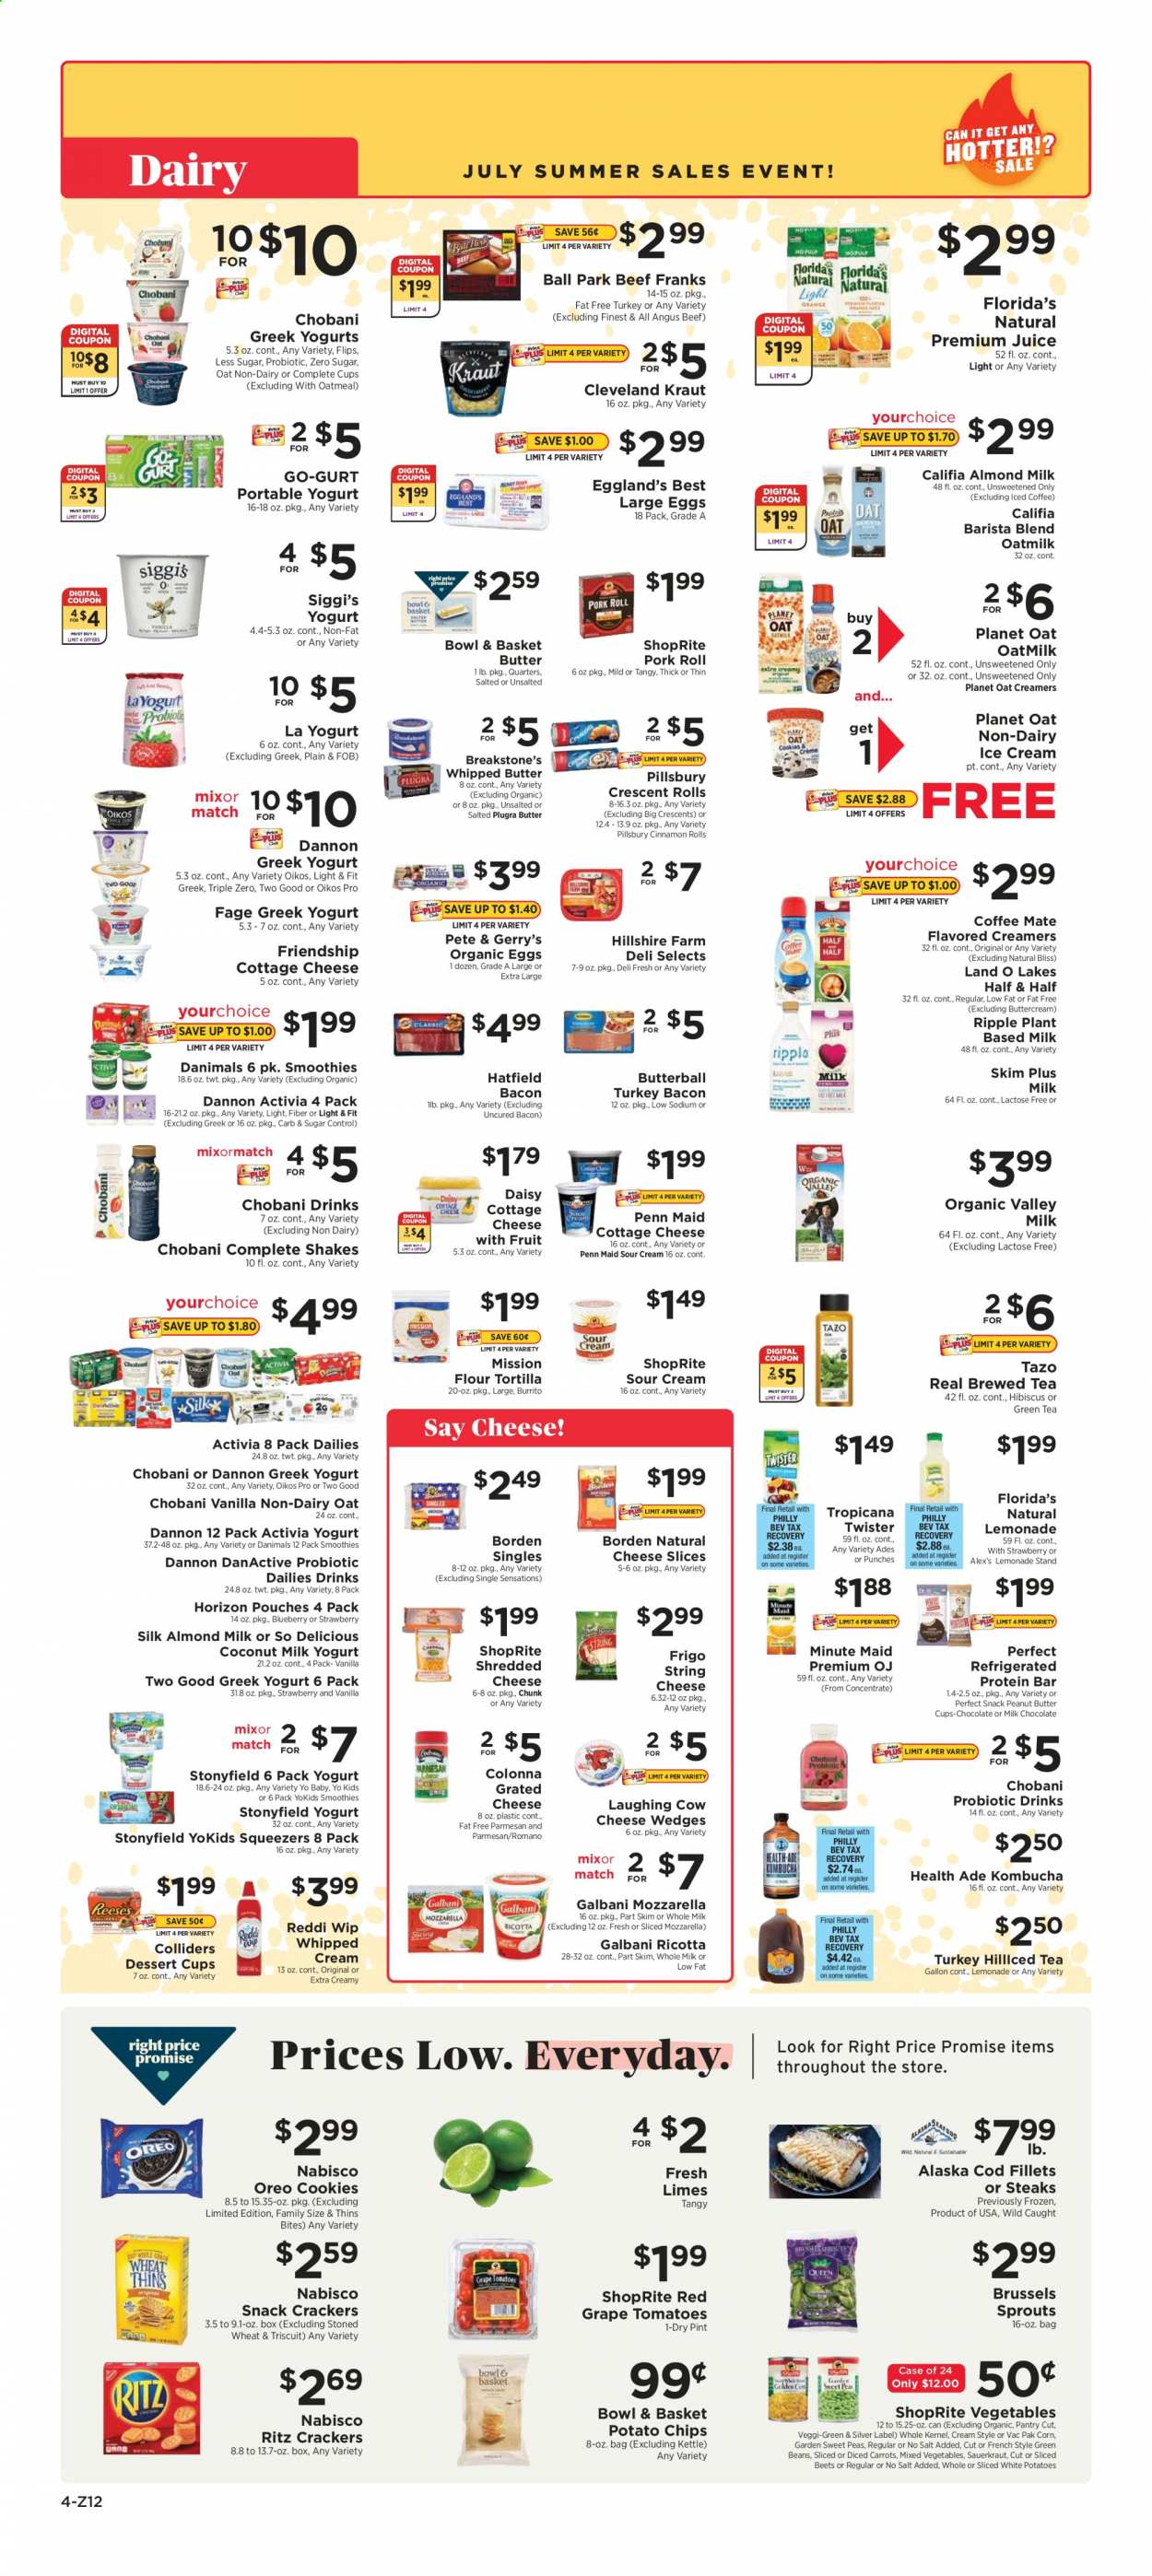 thumbnail - ShopRite Flyer - 07/11/2021 - 07/17/2021 - Sales products - tortillas, Bowl & Basket, cinnamon roll, crescent rolls, corn, green beans, tomatoes, brussel sprouts, limes, cod, Pillsbury, burrito, bacon, Butterball, turkey bacon, Hillshire Farm, cottage cheese, mozzarella, ricotta, shredded cheese, sliced cheese, string cheese, parmesan, The Laughing Cow, grated cheese, Galbani, greek yoghurt, Oreo, yoghurt, Activia, Oikos, Chobani, Dannon, Danimals, almond milk, shake, oat milk, large eggs, whipped butter, sour cream, whipped cream, ice cream, mixed vegetables, cookies, milk chocolate, snack, crackers, peanut butter cups, Florida's Natural, RITZ, potato chips, Thins, oatmeal, coconut milk, sauerkraut, protein bar, lemonade, juice, Tropicana Twister, fruit punch, smoothie, kombucha, green tea, beef meat, steak, Half and half. Page 4.